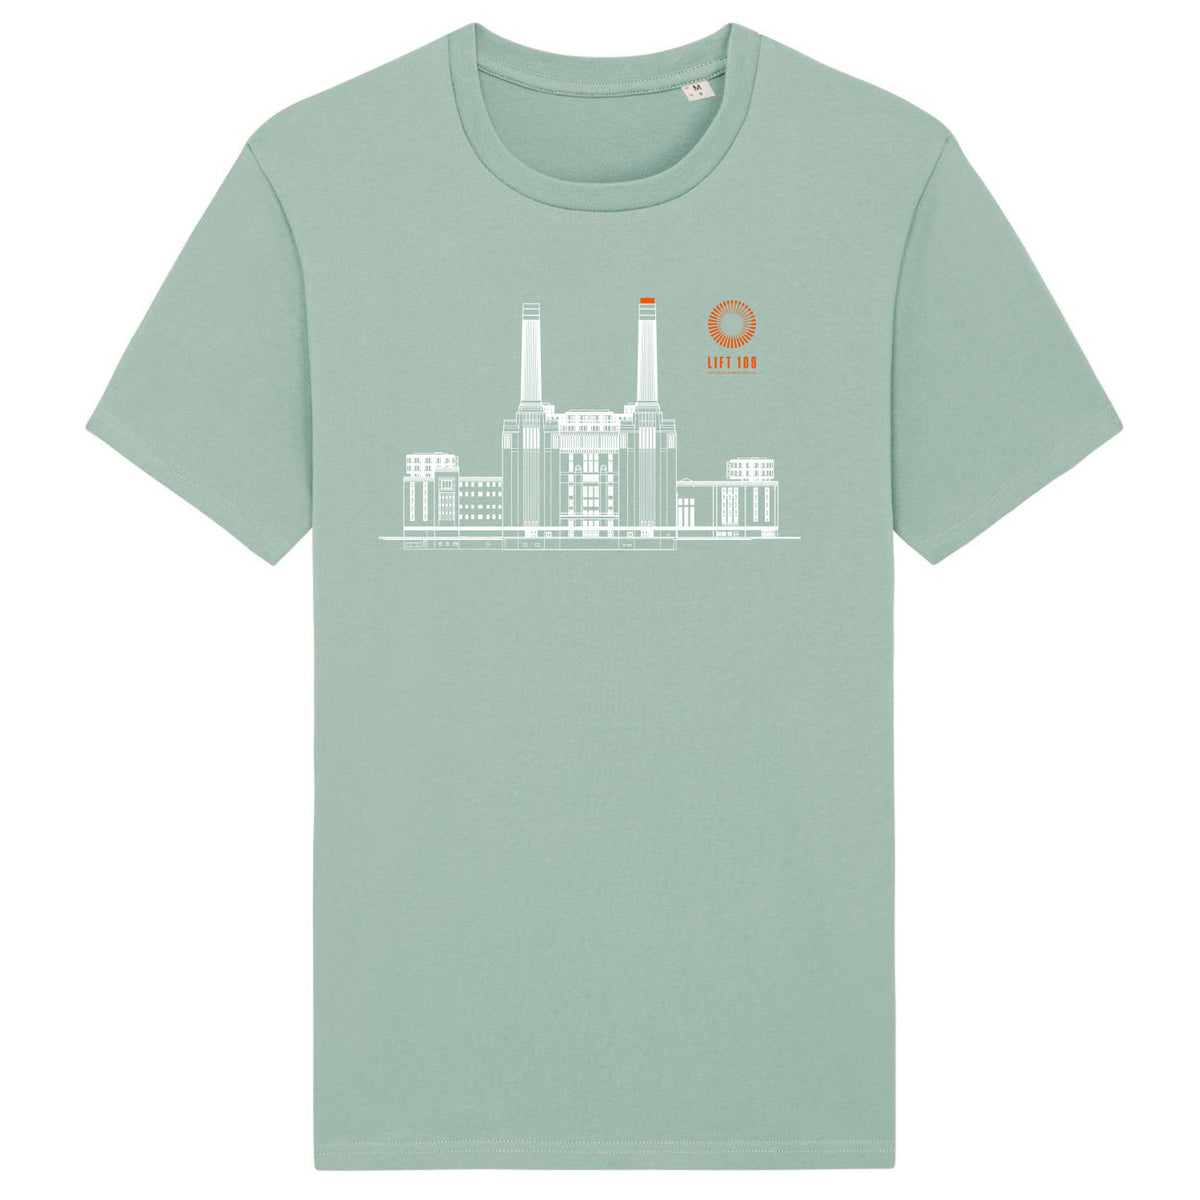 Architectural Drawing - Aloe Green Unisex T-shirt